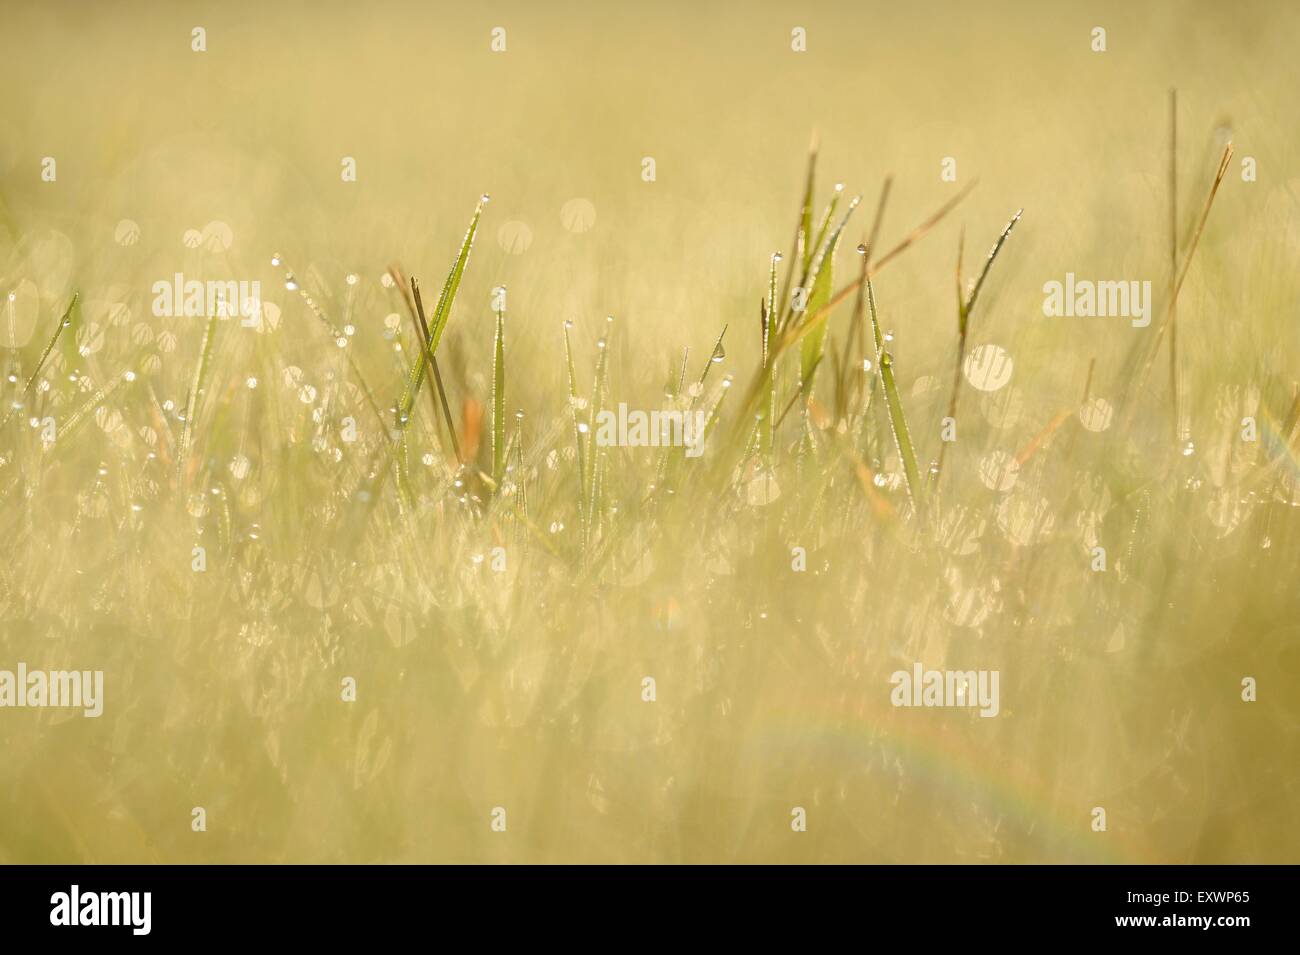 Grass blades with waterdrops in a meadow Stock Photo